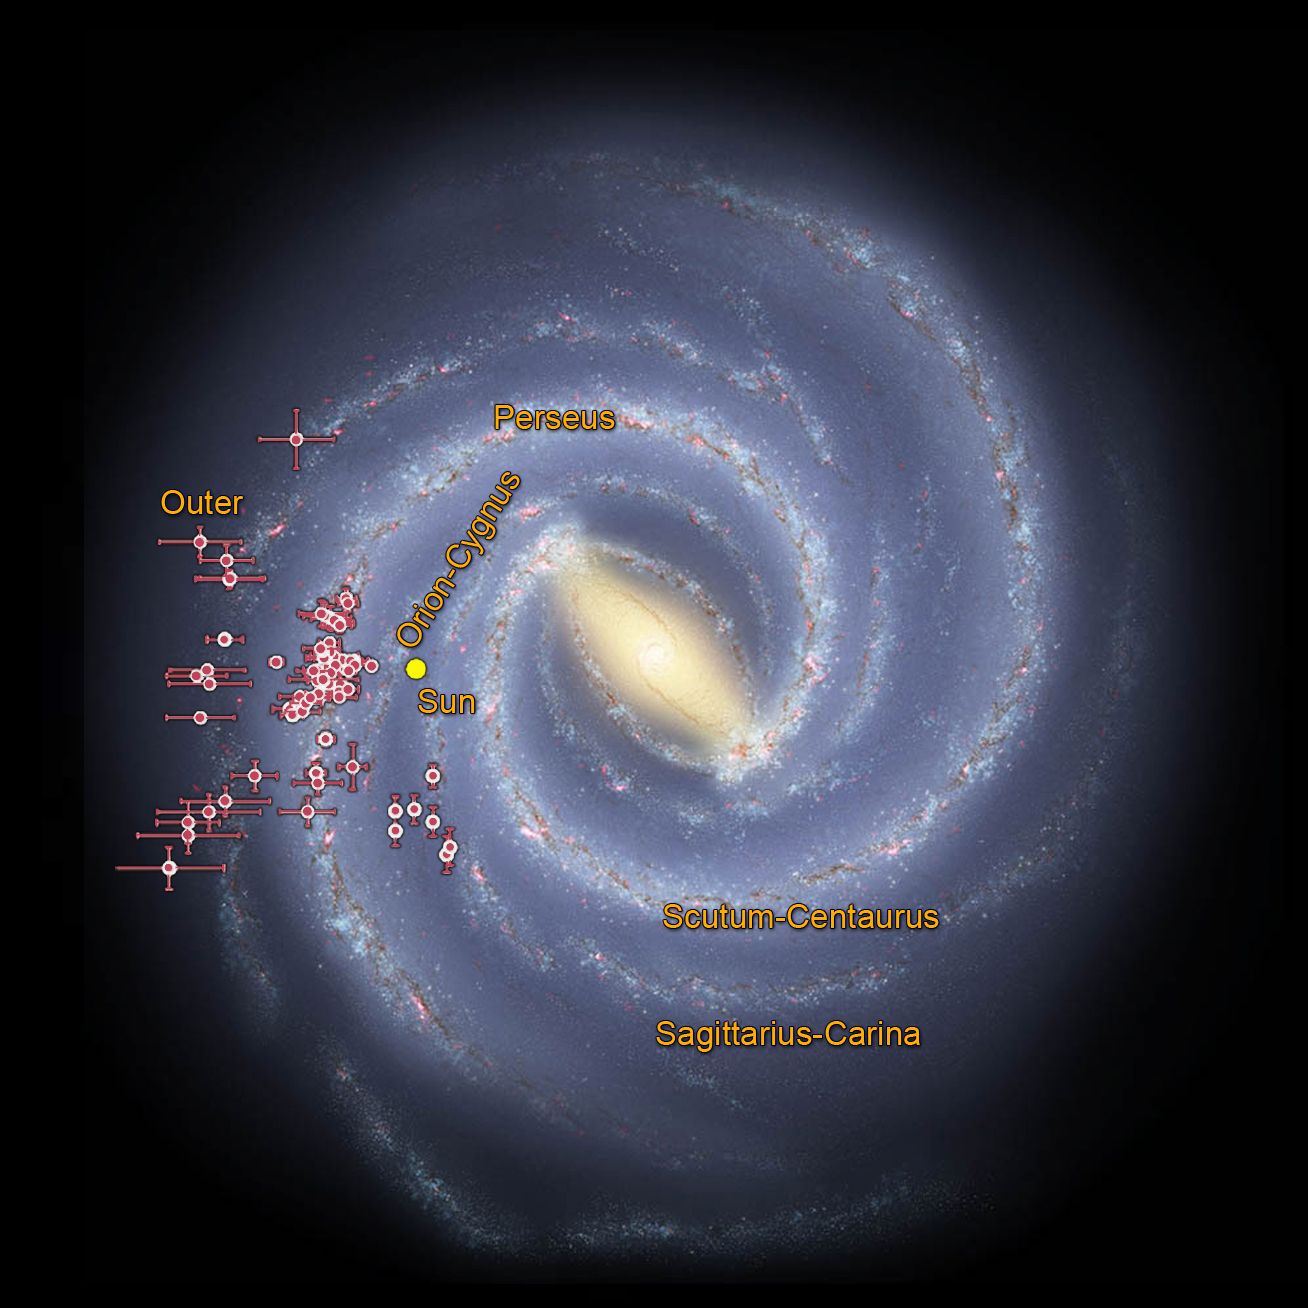 Using data from NASA's WISE spacecraft, astronomers were able to trace the shape of our Milky Way galaxy's spiral arms, by revealing the presence of hundreds of open clusters of very young stars shrouded in dust, called embedded clusters, which are known to reside in spiral arms. The image shows the location of the newly discovered stellar clusters along the Milky Way's spiral arms. Image Credit: NASA/JPL-Caltech/R. Hurt (SSC/Caltech)